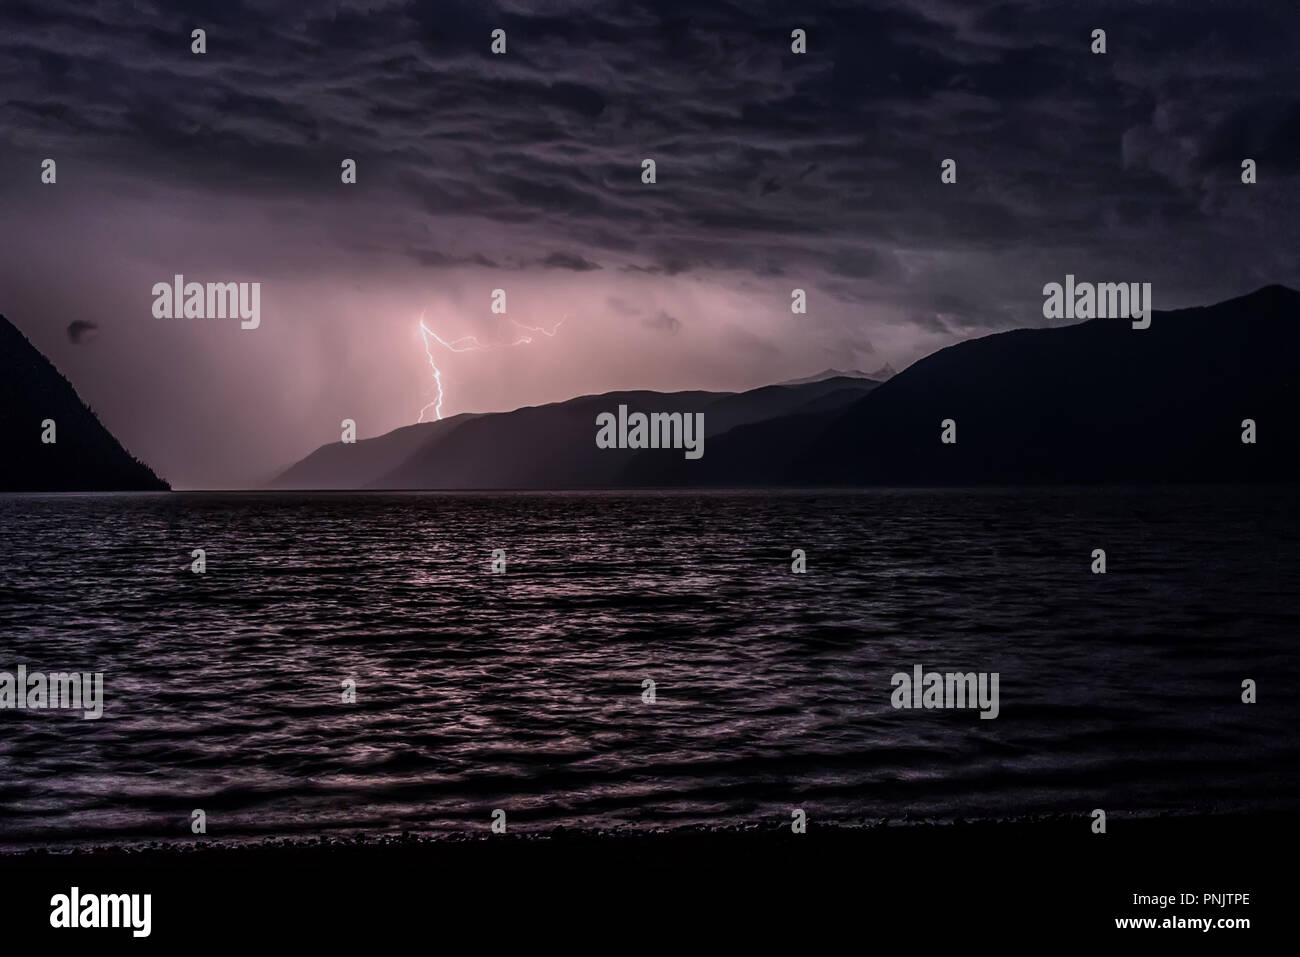 Lightning in dark blue clouds during a thunderstorm over a lake in the mountains Stock Photo